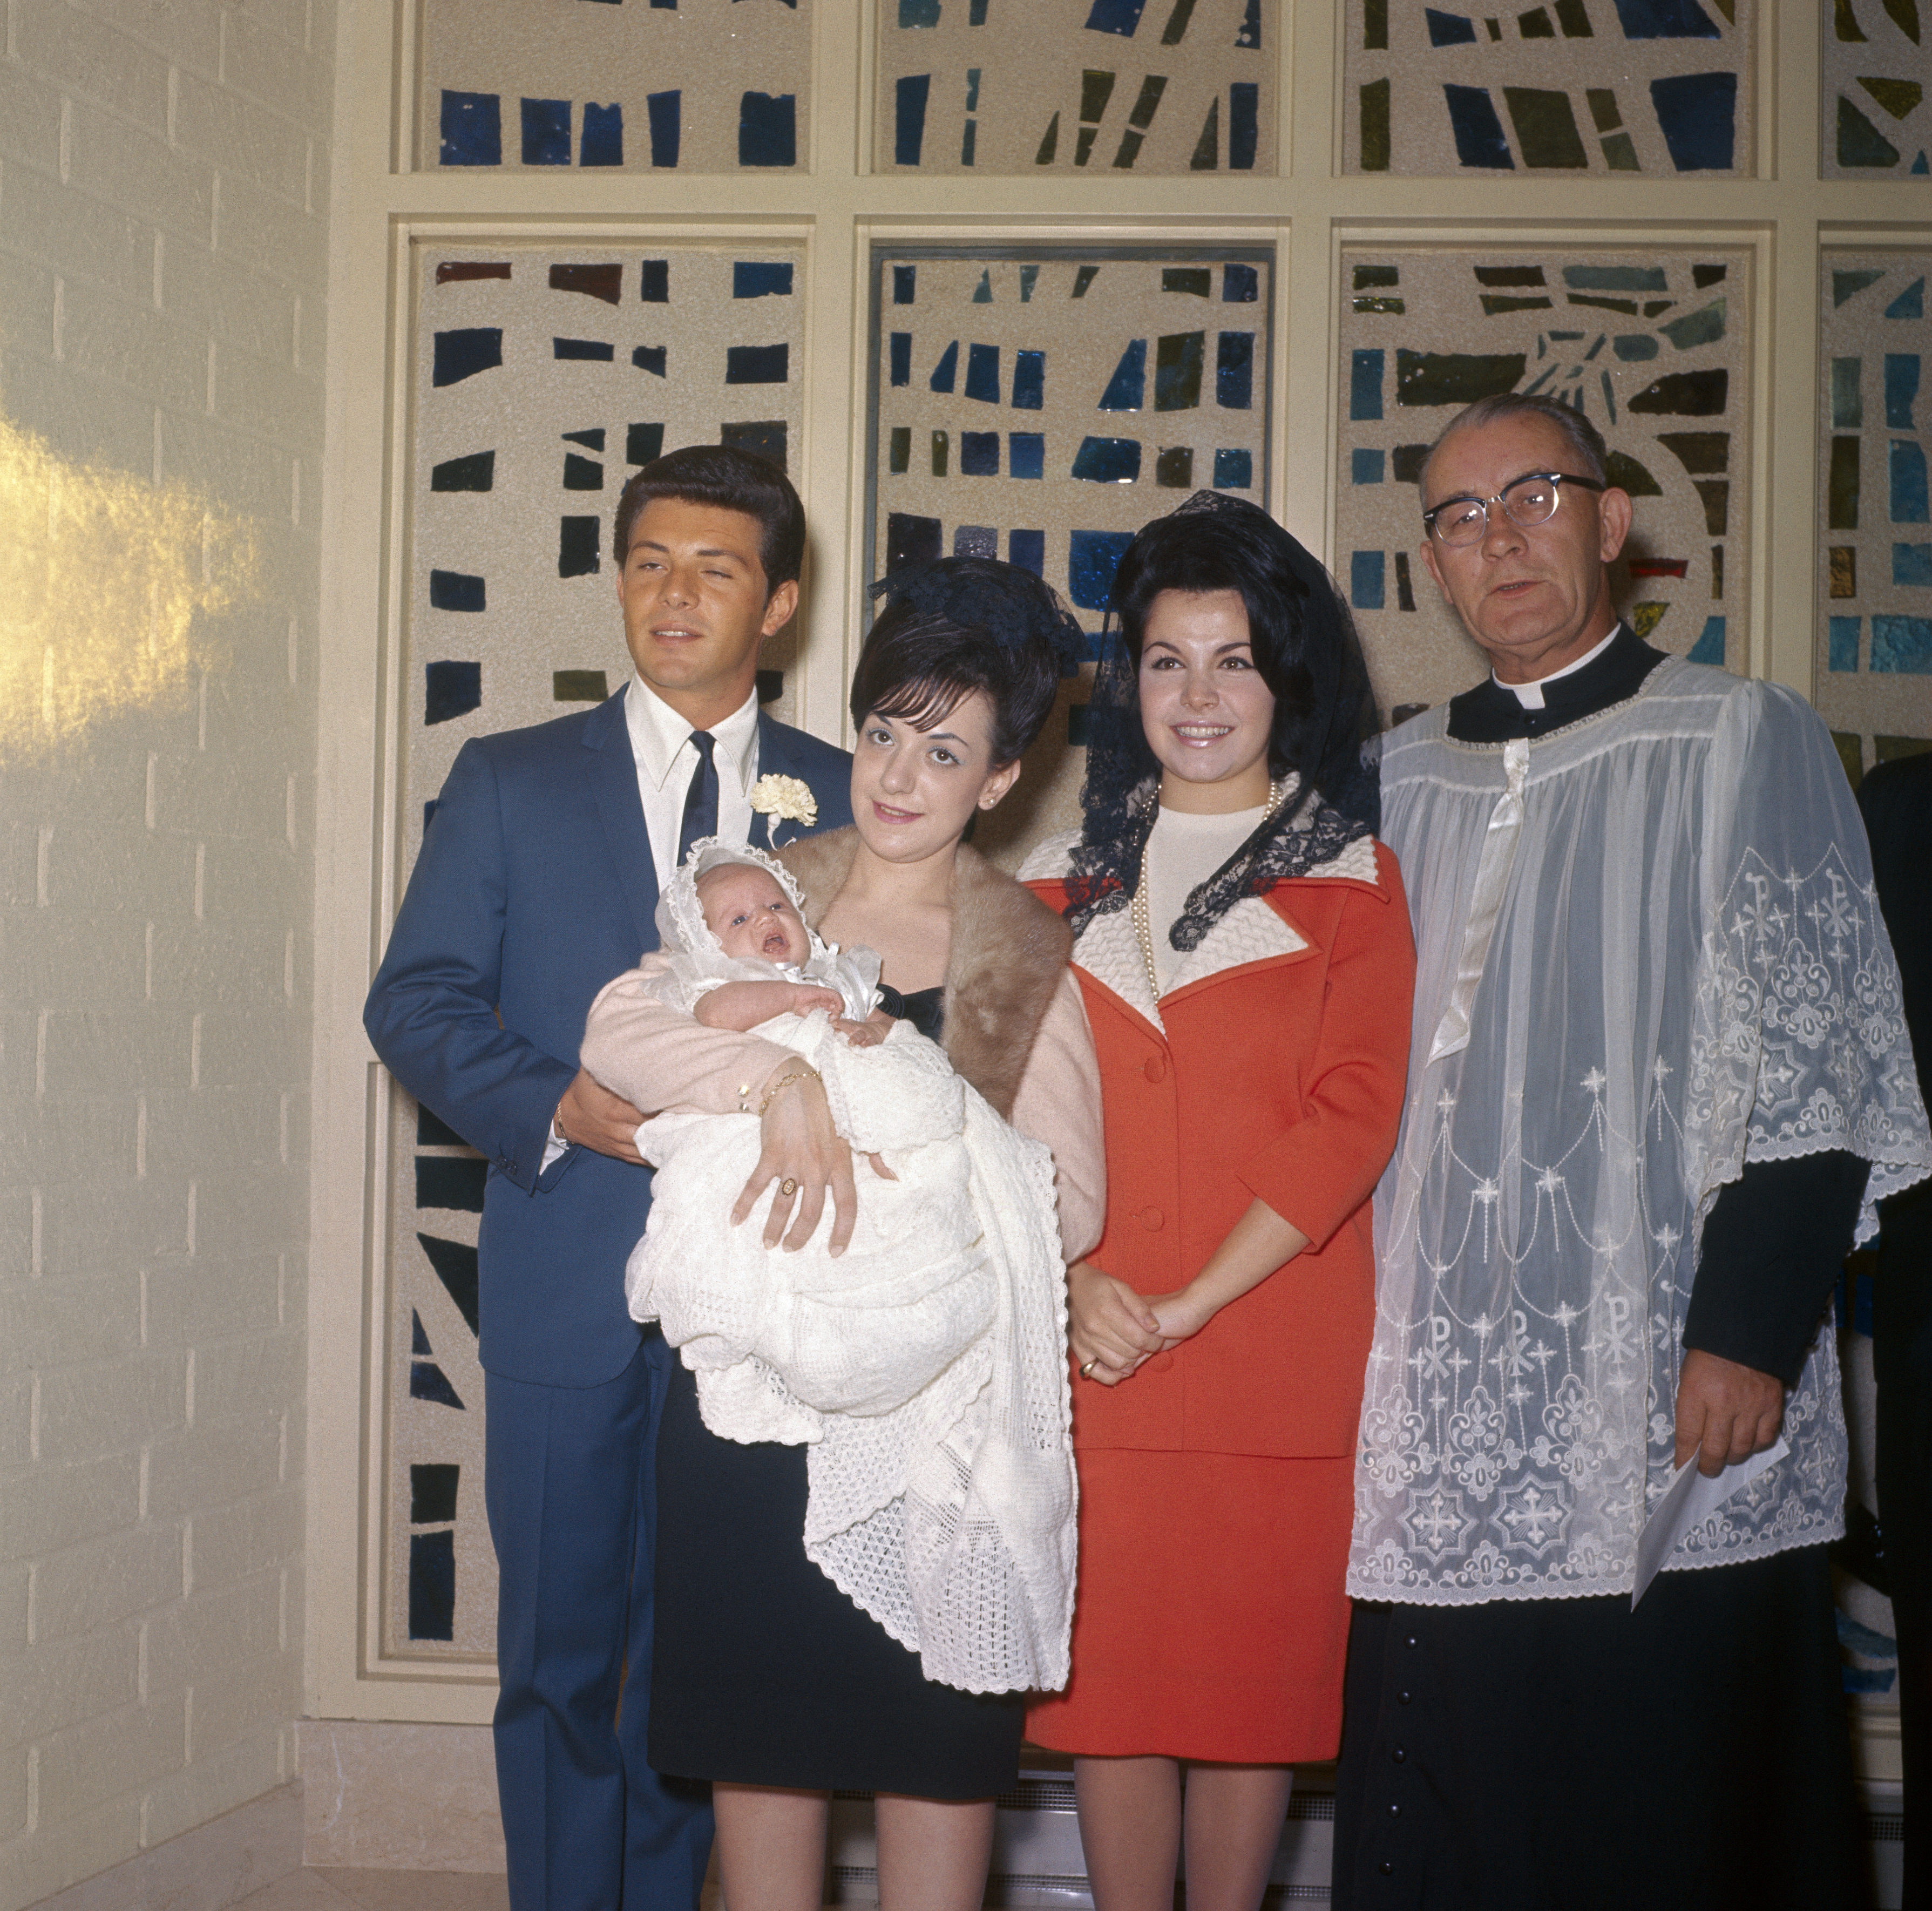 Annette Funicello with daughter Gina, Gina's godparents, Marine Ann Schiochi and Frankie Avalon, and the presiding priest circa 1965. | Source: Getty Images